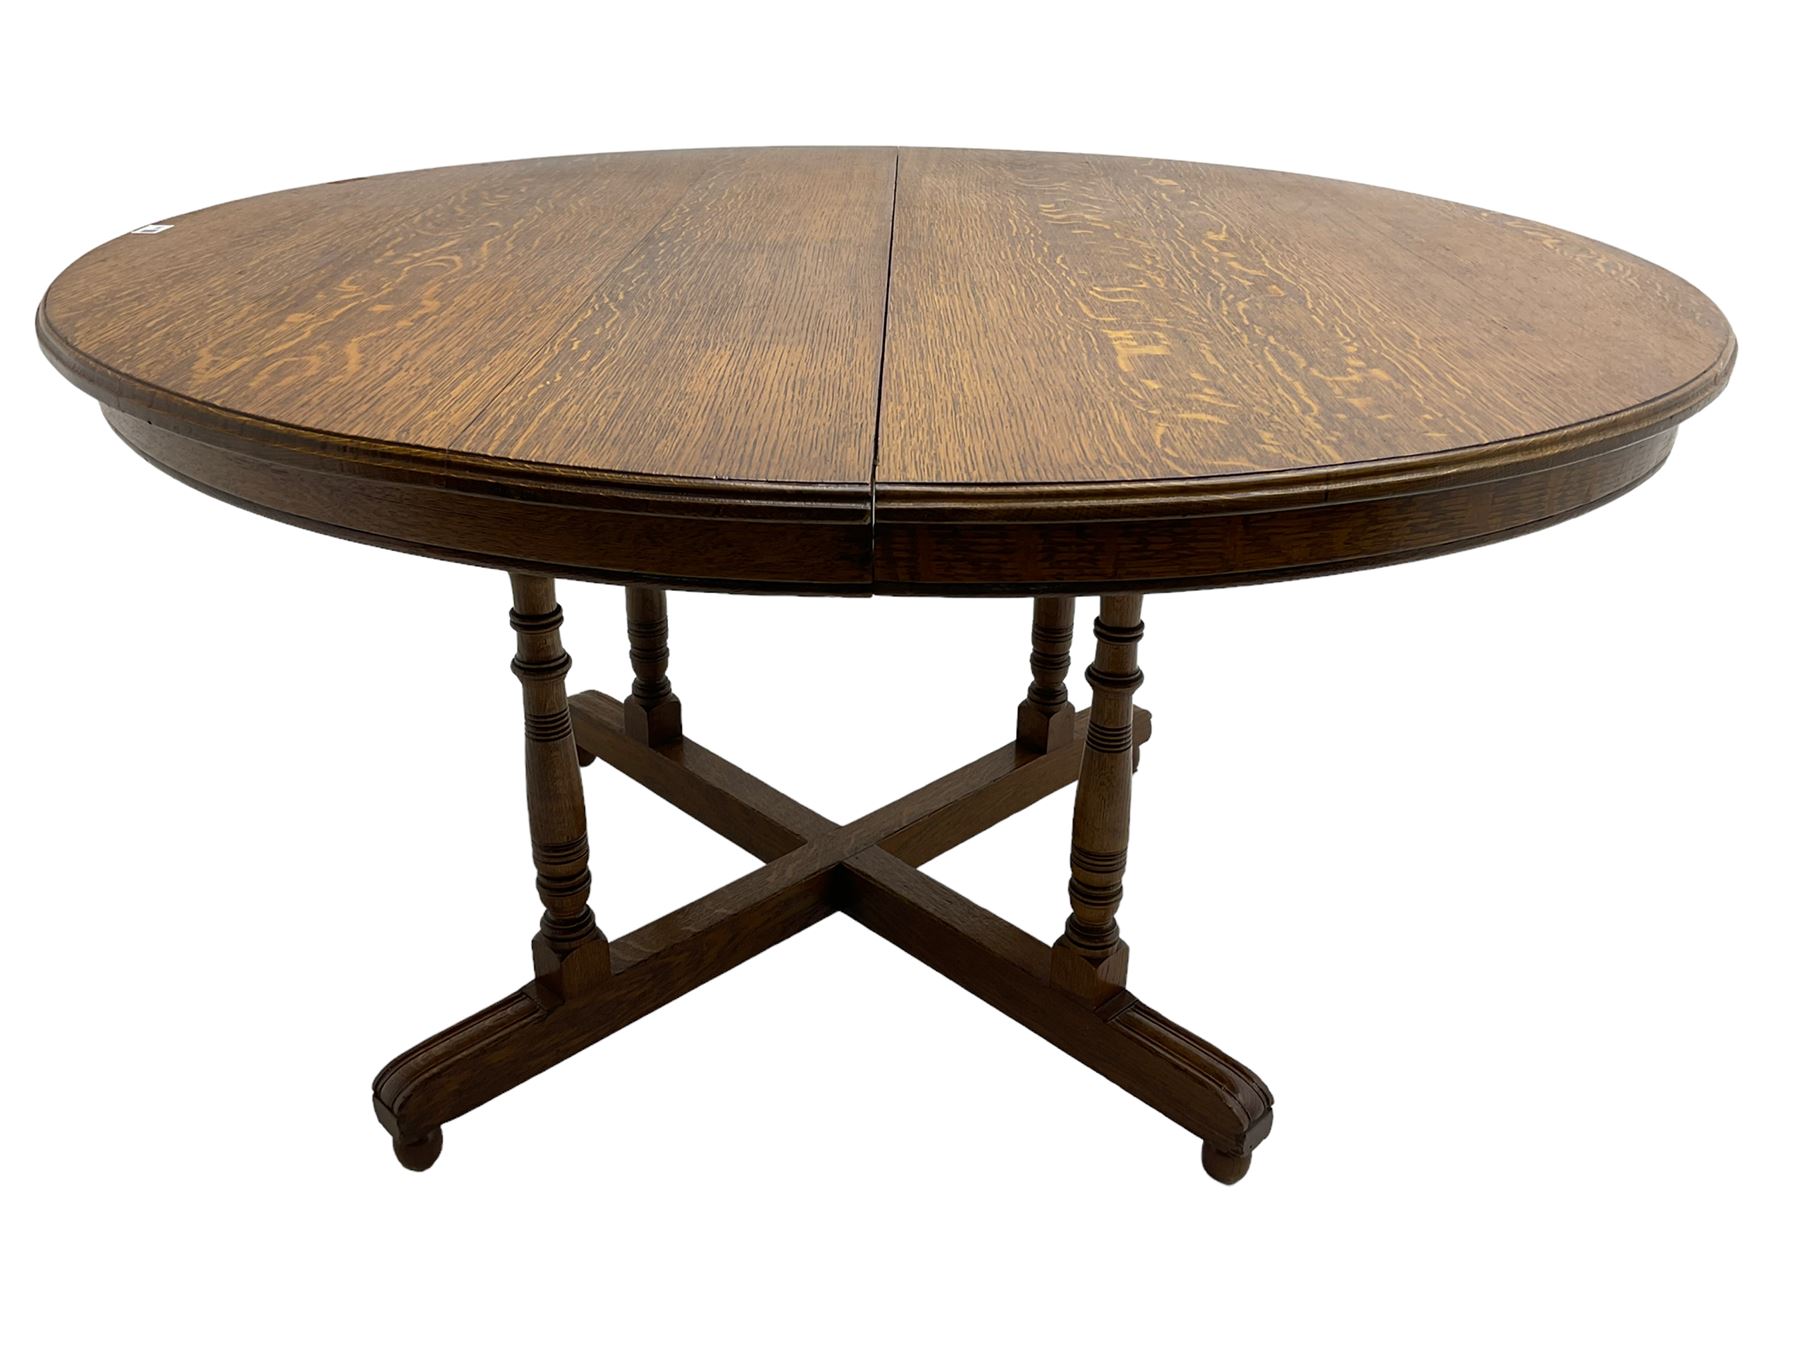 Early 20th century oak dining table - Image 6 of 8